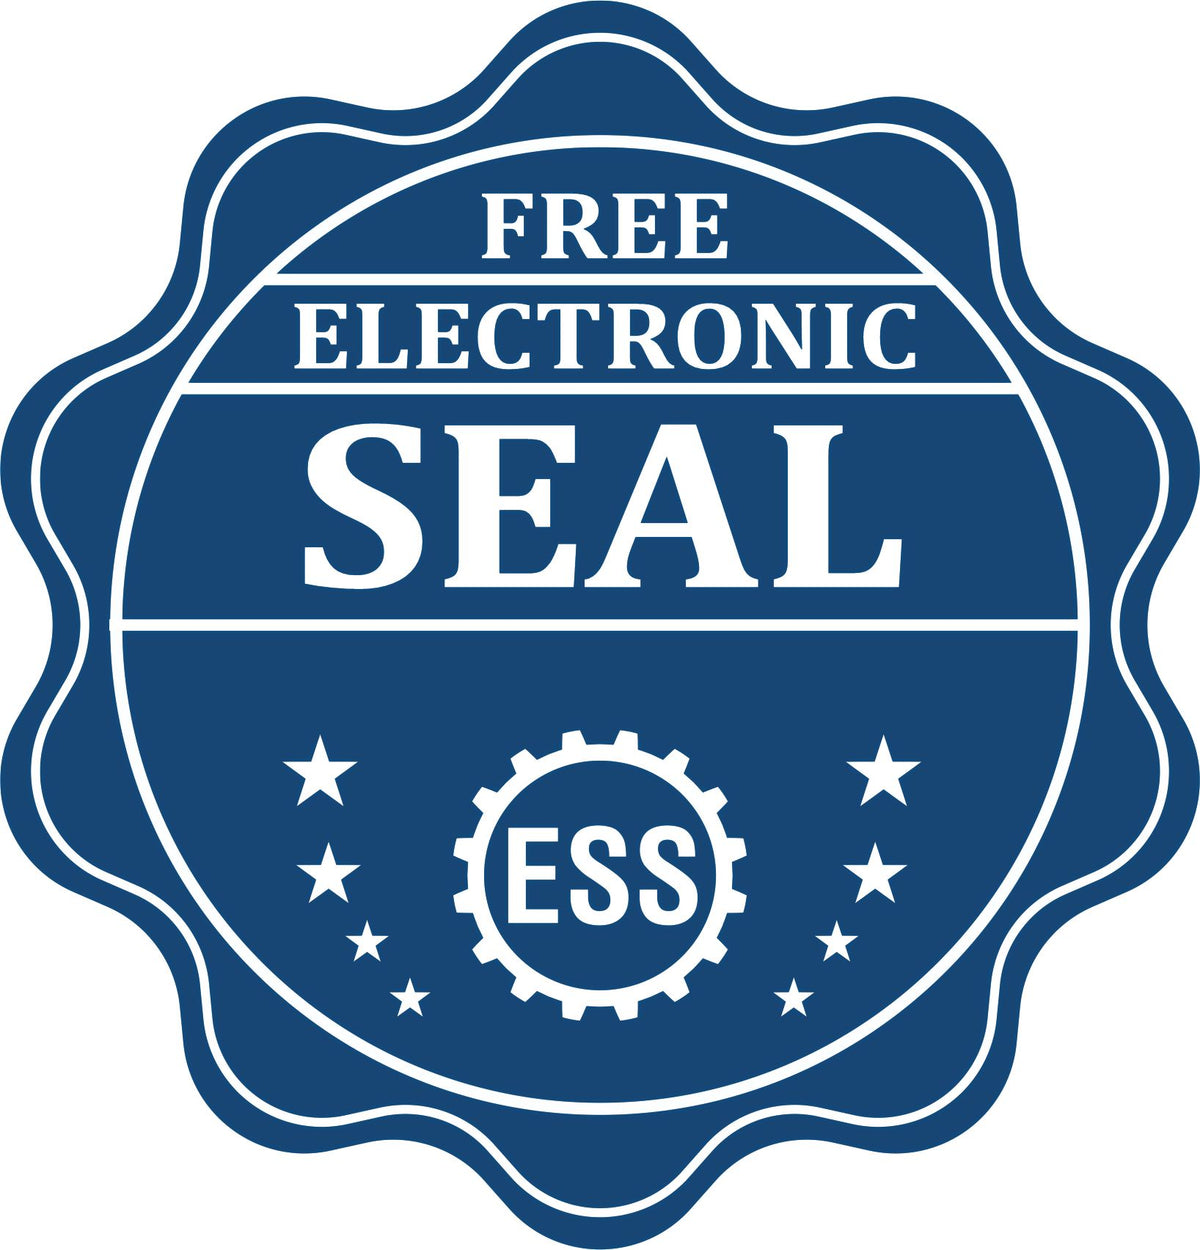 A badge showing a free electronic seal for the Soft Pocket Nevada Landscape Architect Embosser with stars and the ESS gear on the emblem.